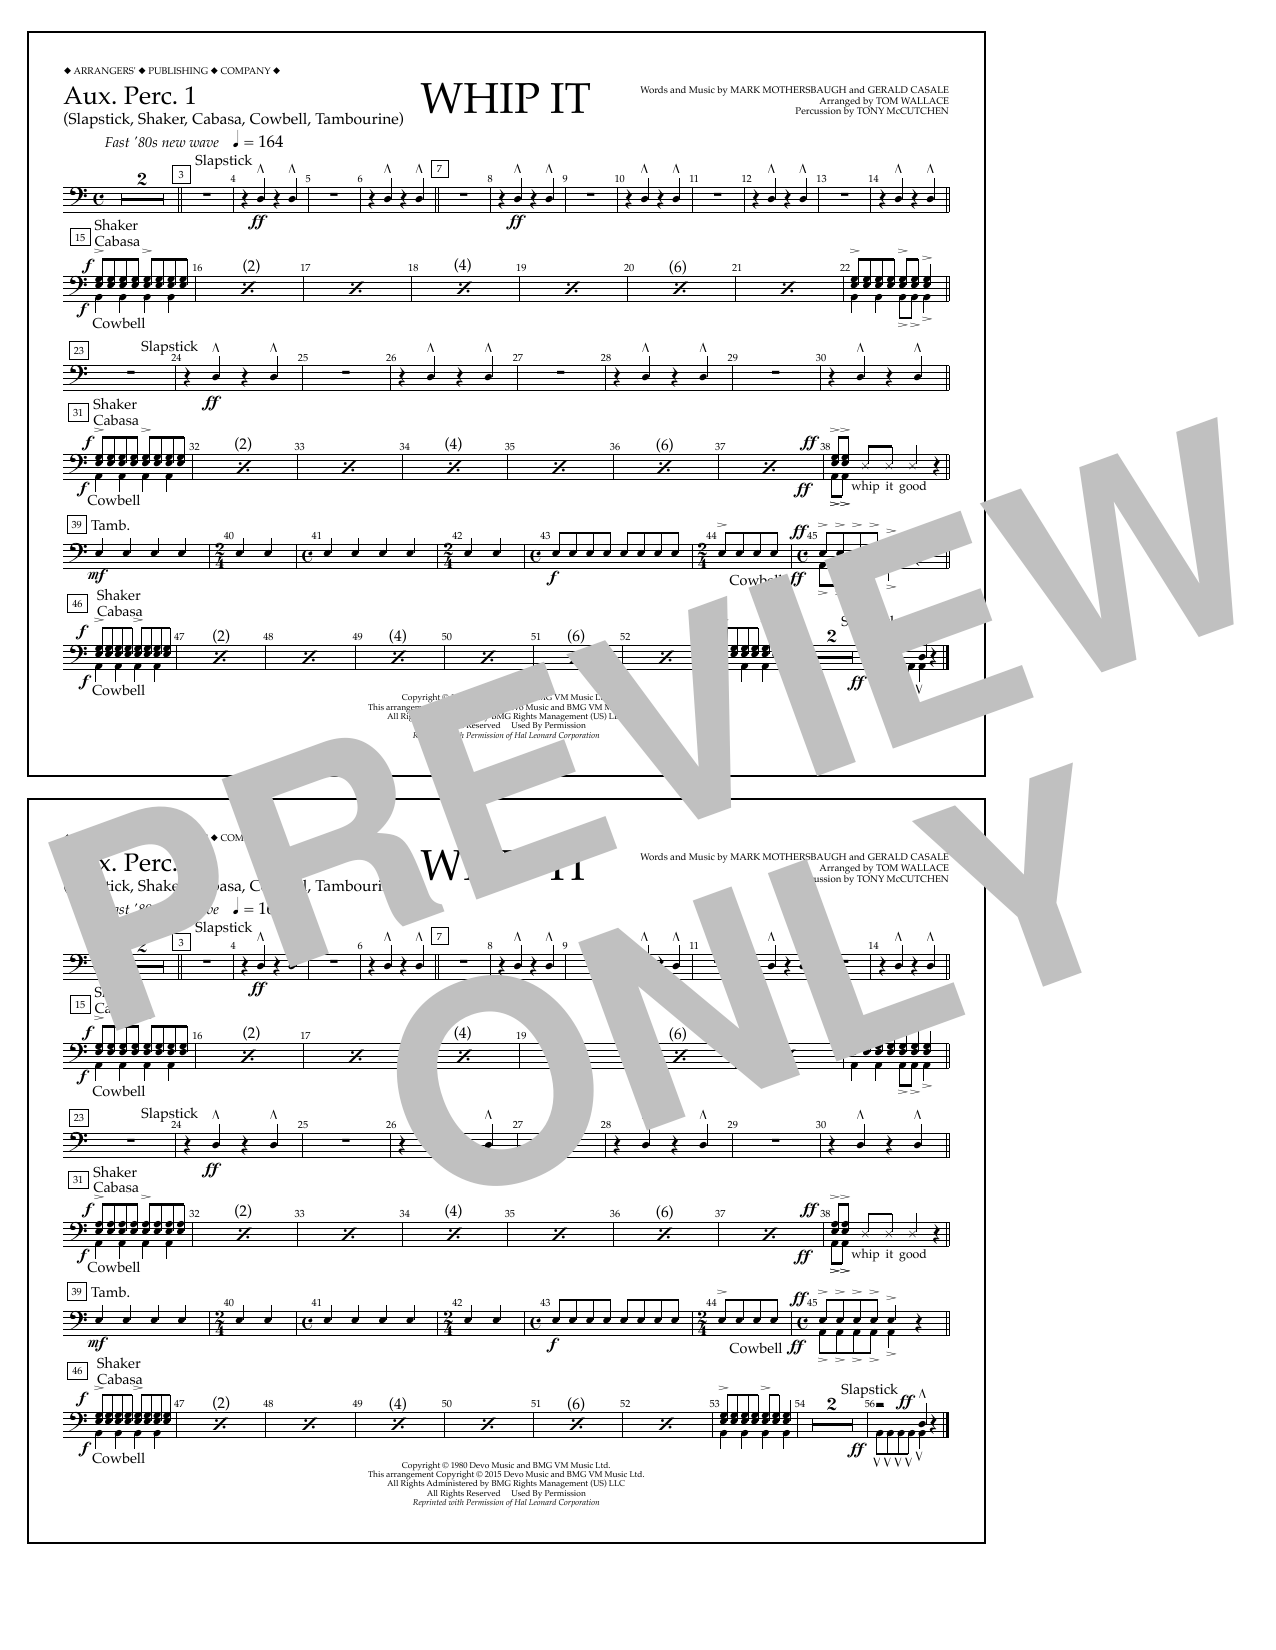 Download Tom Wallace Whip It - Aux. Perc. 1 Sheet Music